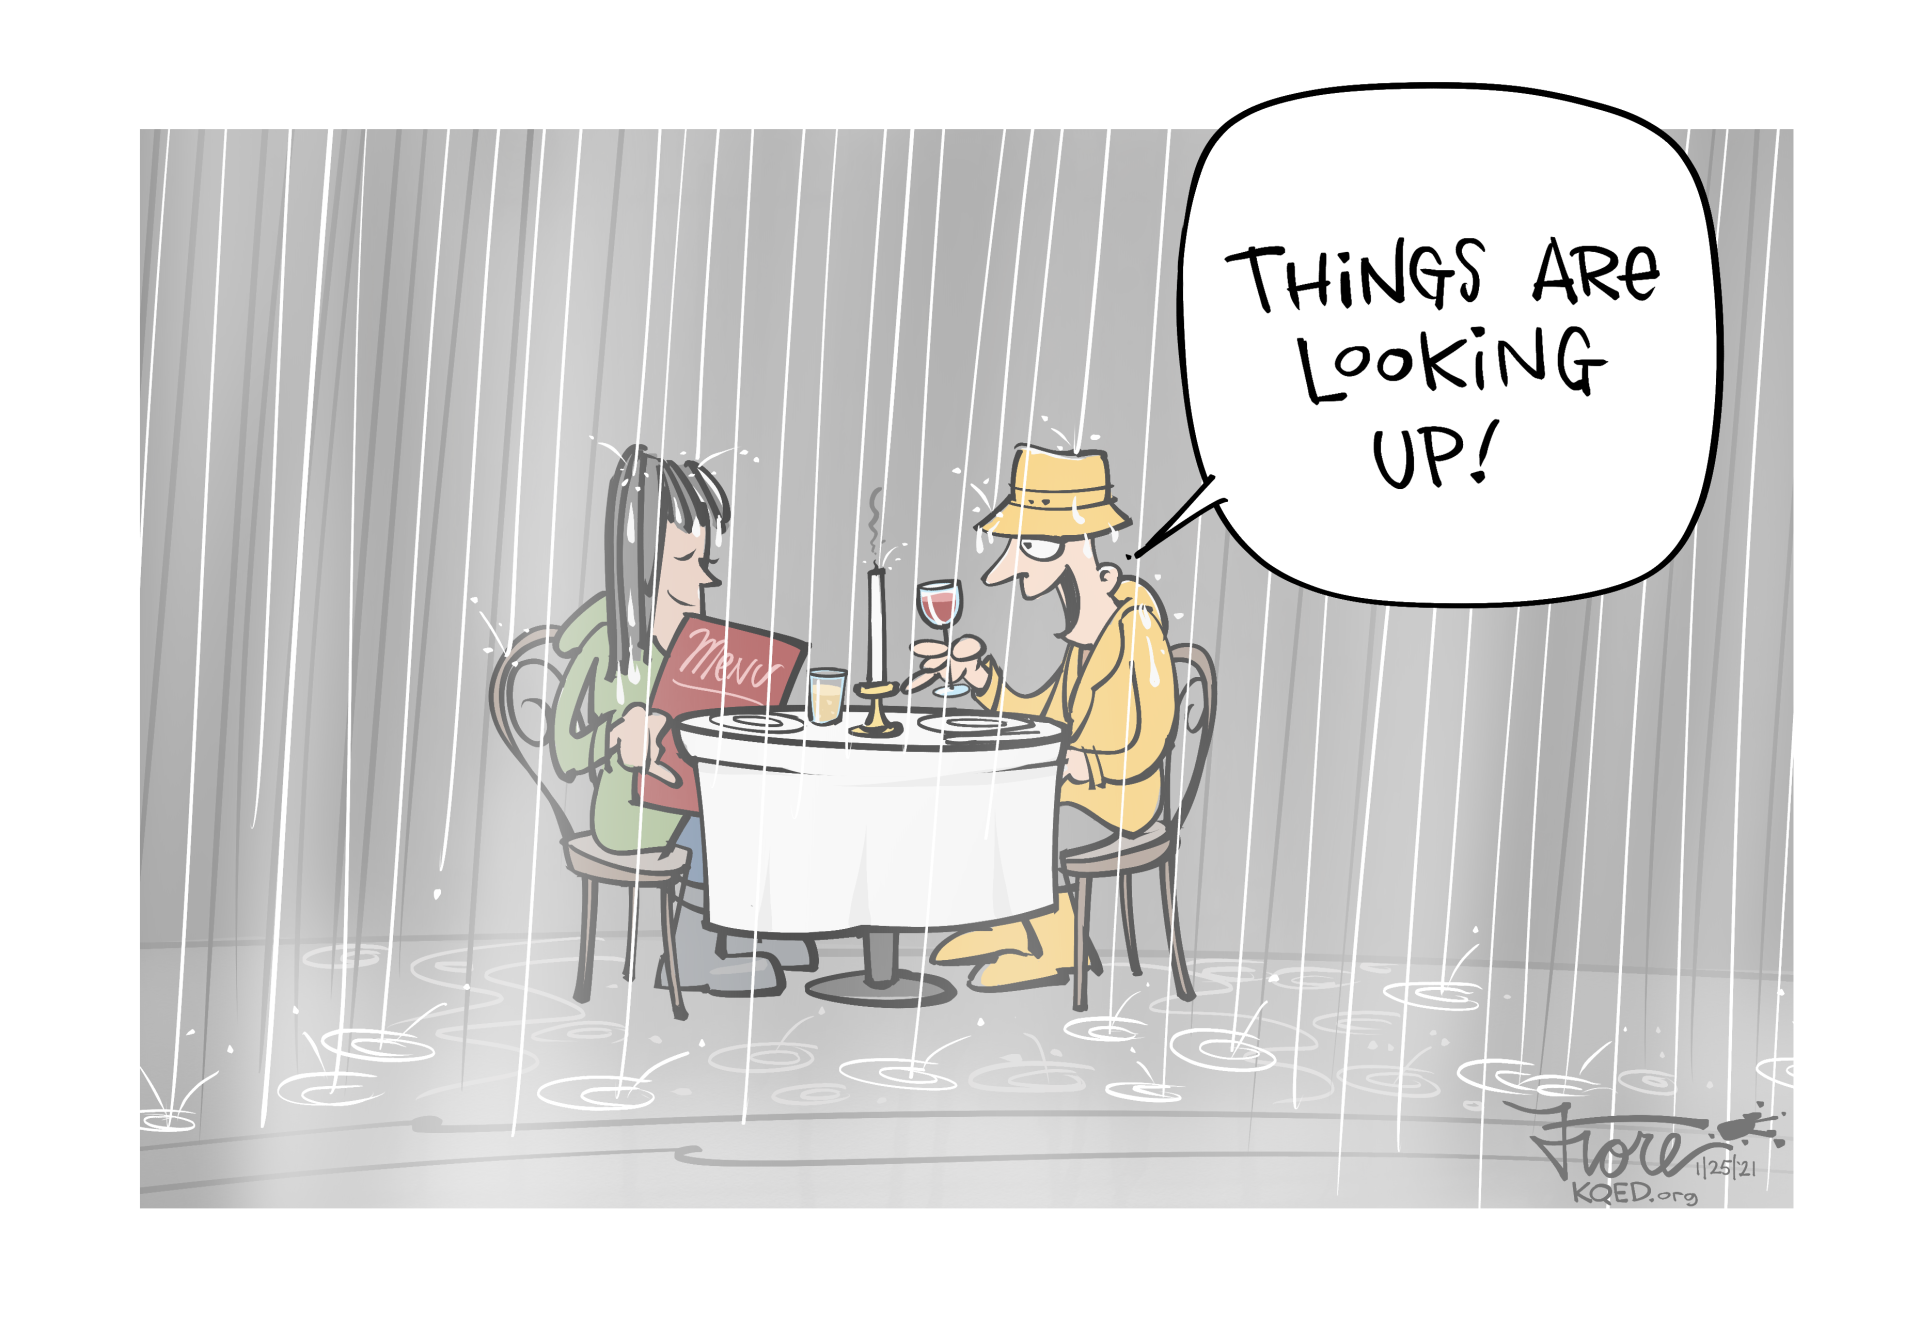 A Mark Fiore cartoon about COVID-19 restrictions easing and outdoor dining reopening as an atmospheric river is headed our way. Two people eating at an outdoor table in the pouring rain with one saying, "things are looking up!"